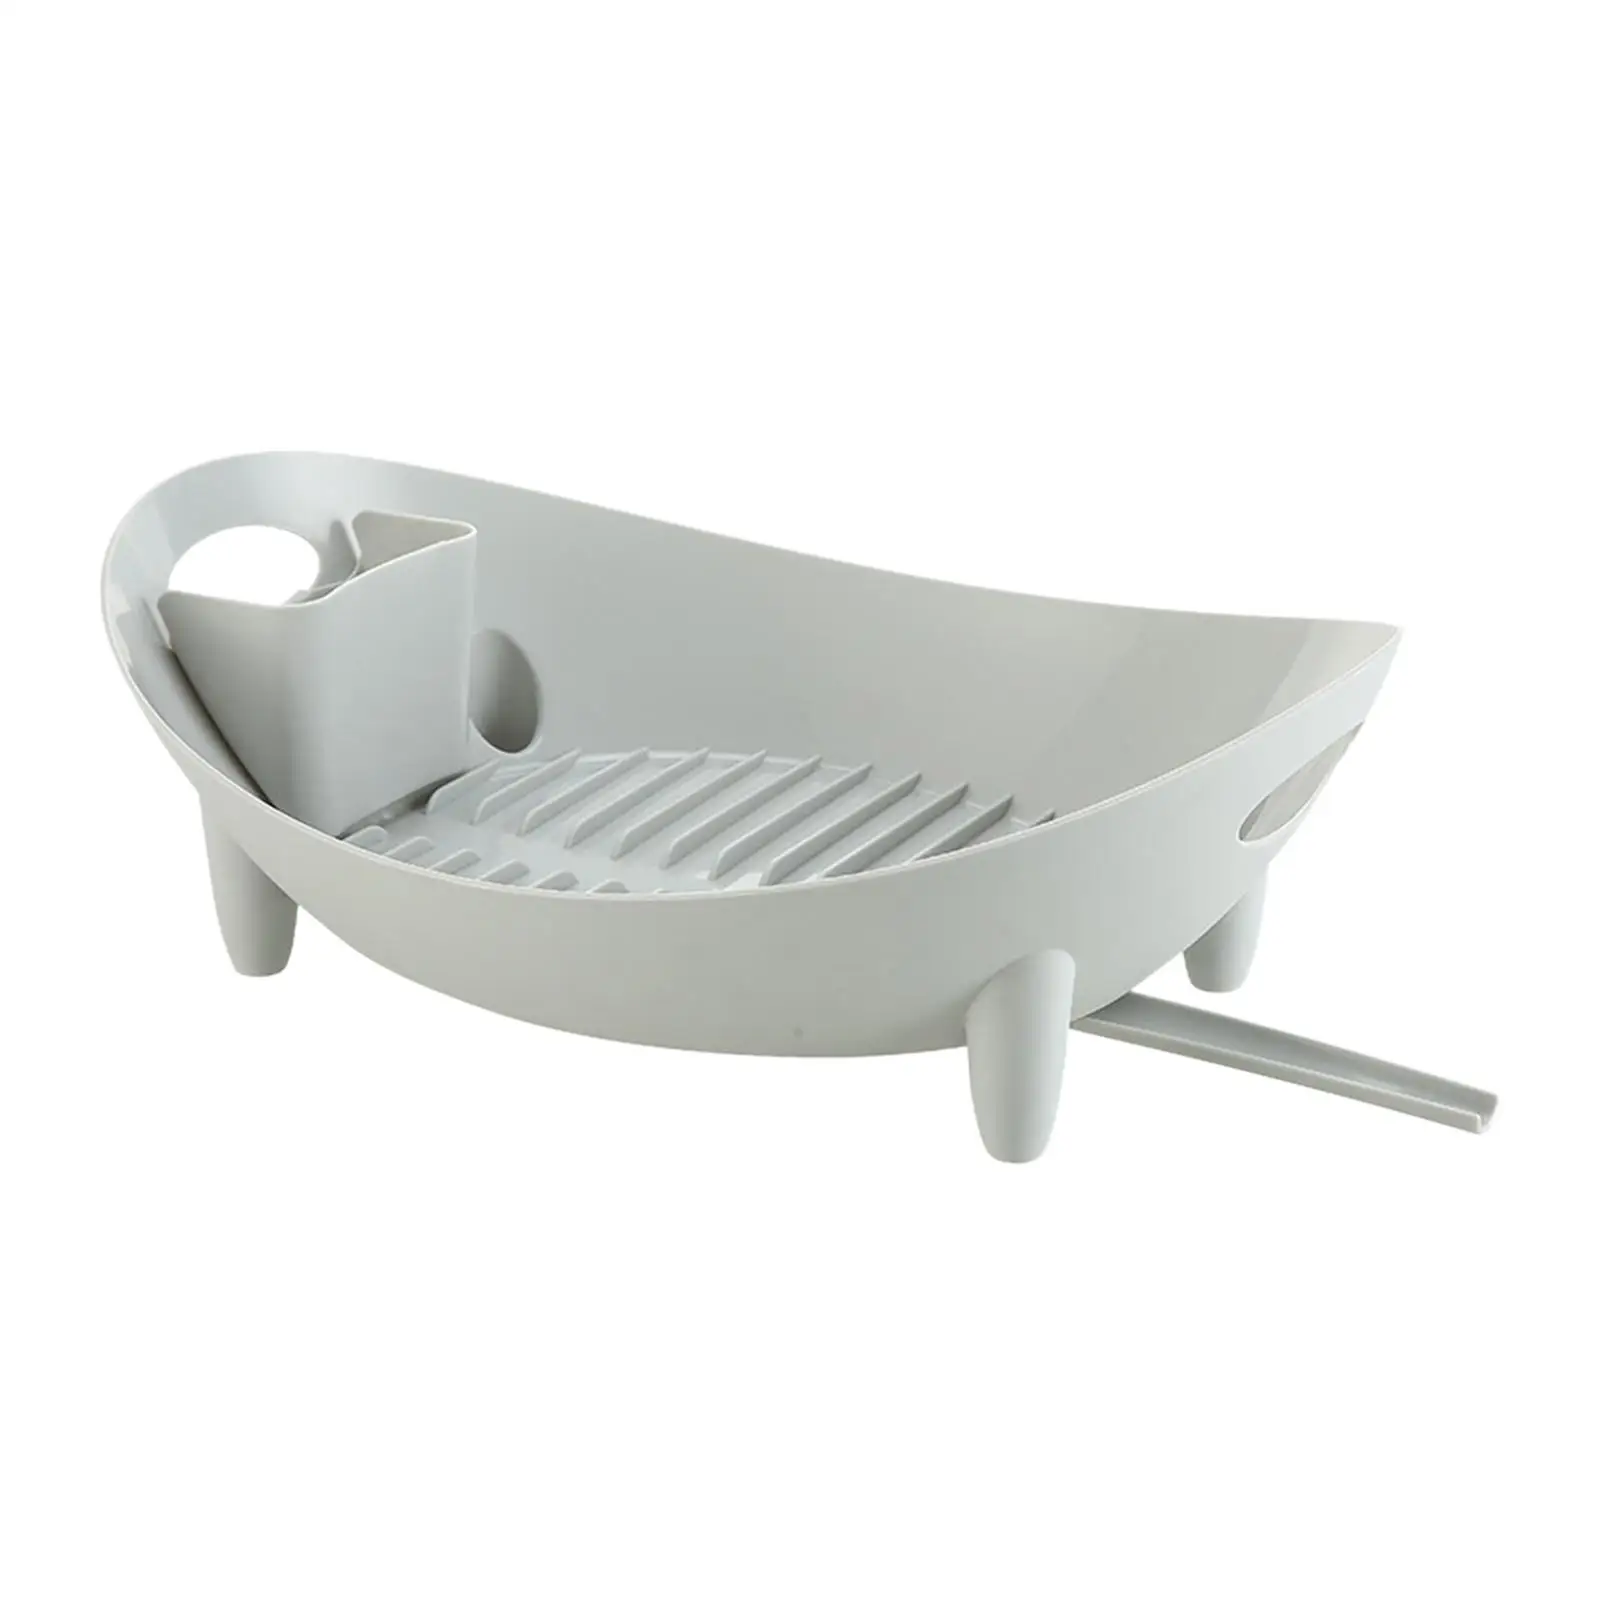 Dish Drying Rack Durable for Dishes, Mugs, Spoons, and Forks Utensil Holder